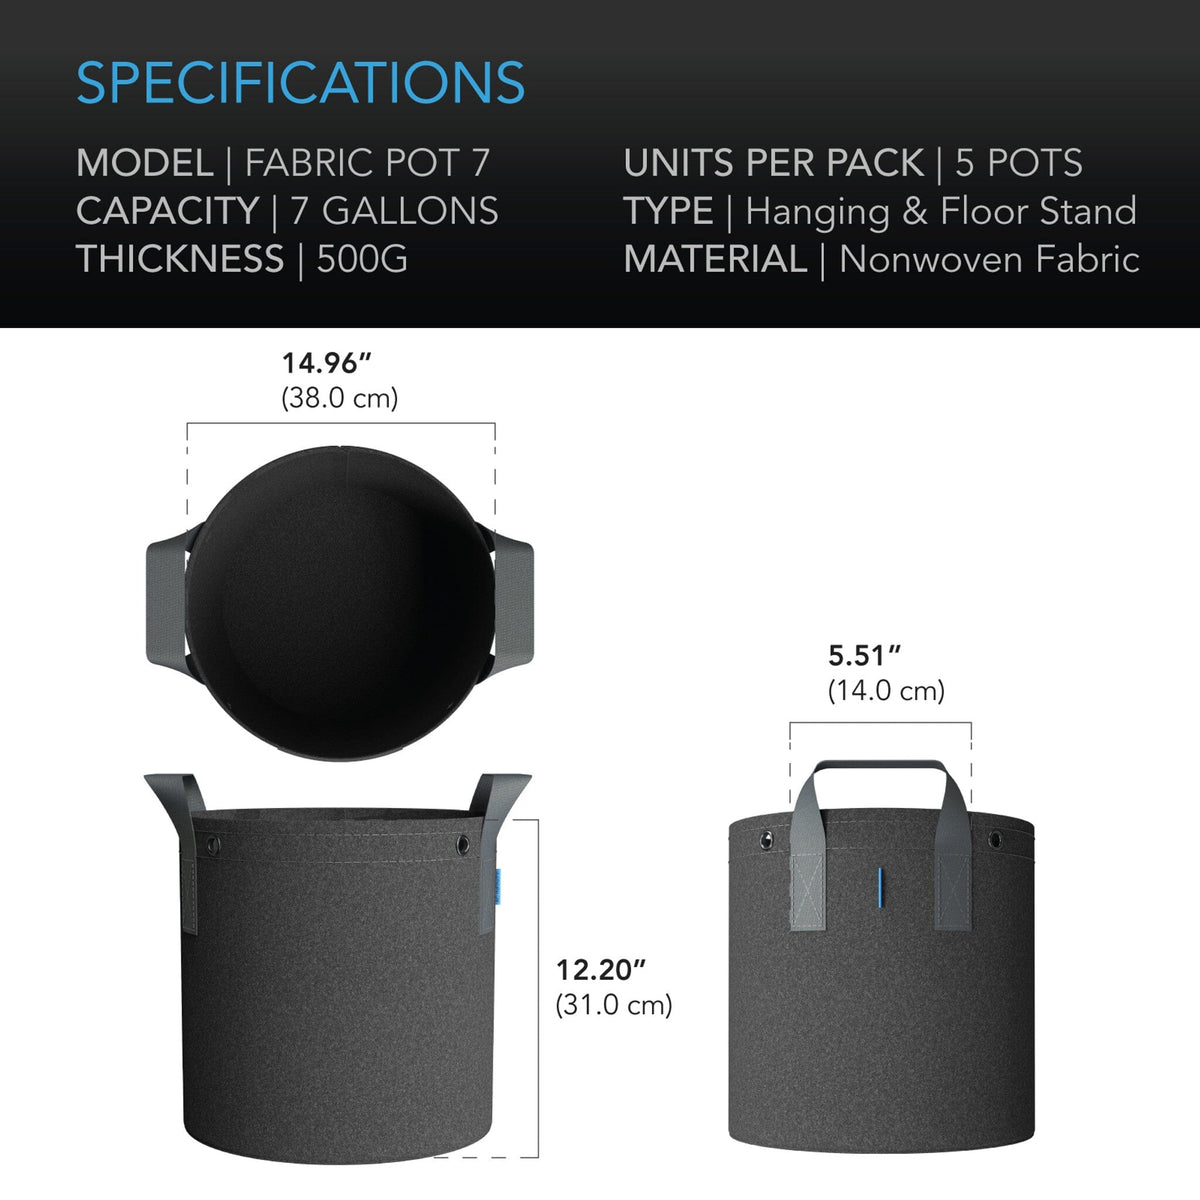 7 Gallon Fabric pot specifications